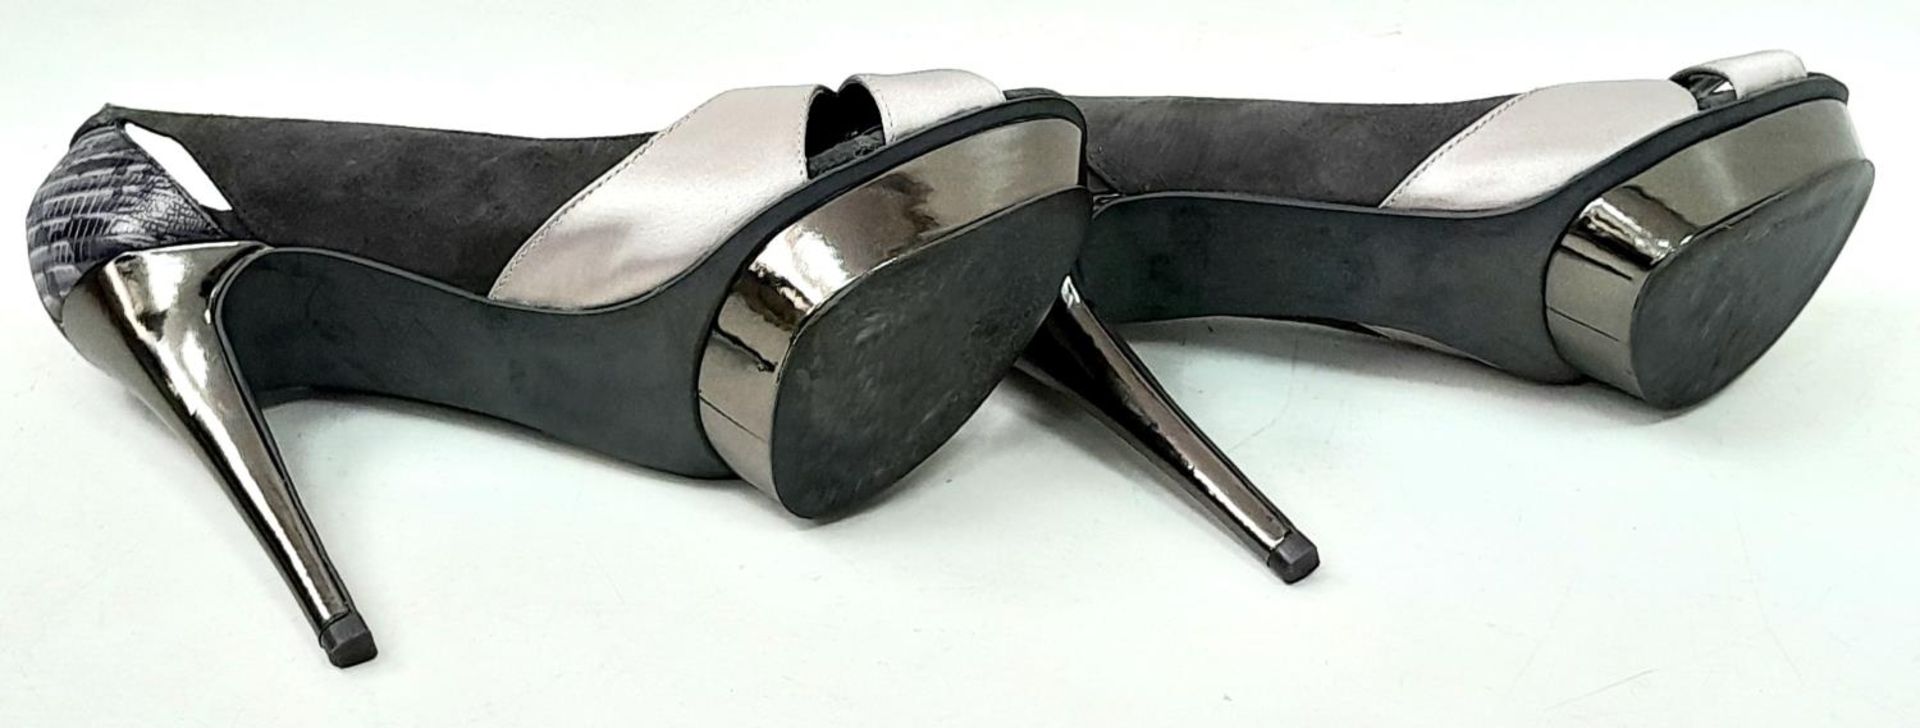 A pair of lightly used high heel (4") ladies shoes by Max Mara - Image 4 of 6